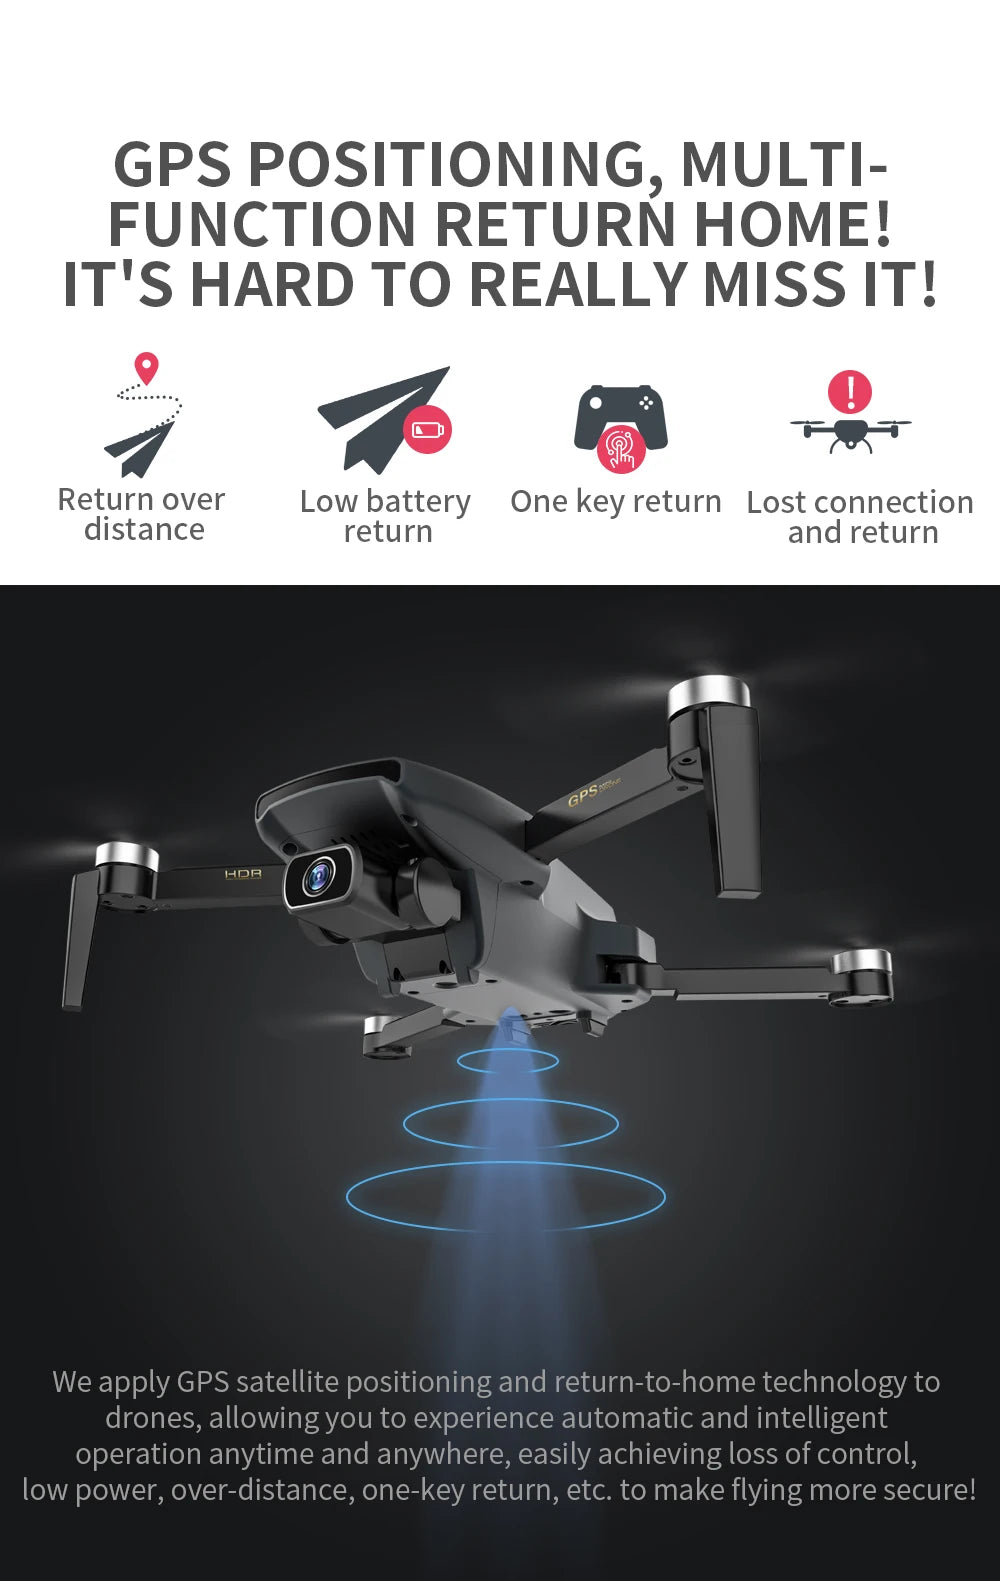 ZLRC SG108 Drone, GPS POSITIONING, MULTI- FUNCTION RETURN HOME!